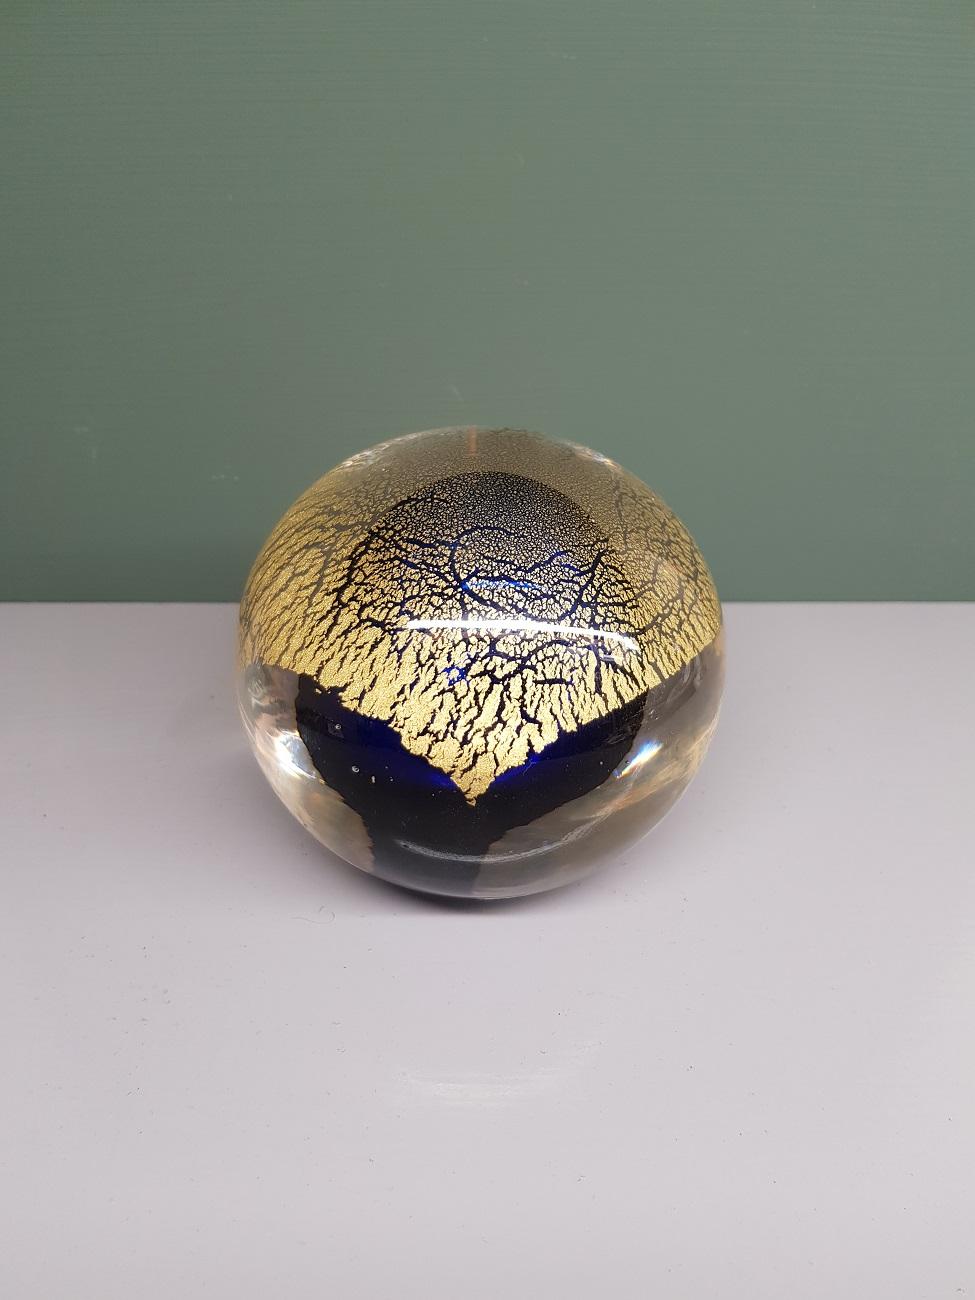 Glass paperweight made by a unknown designer, it has a blue colored bell and a pulled apart golden leaf in good condition, 20th century.

The measurements are,
Depth 10 cm/ 3.9 inch.
Width 10 cm/ 3.9 inch.
Height 8 cm/ 3.1 inch.